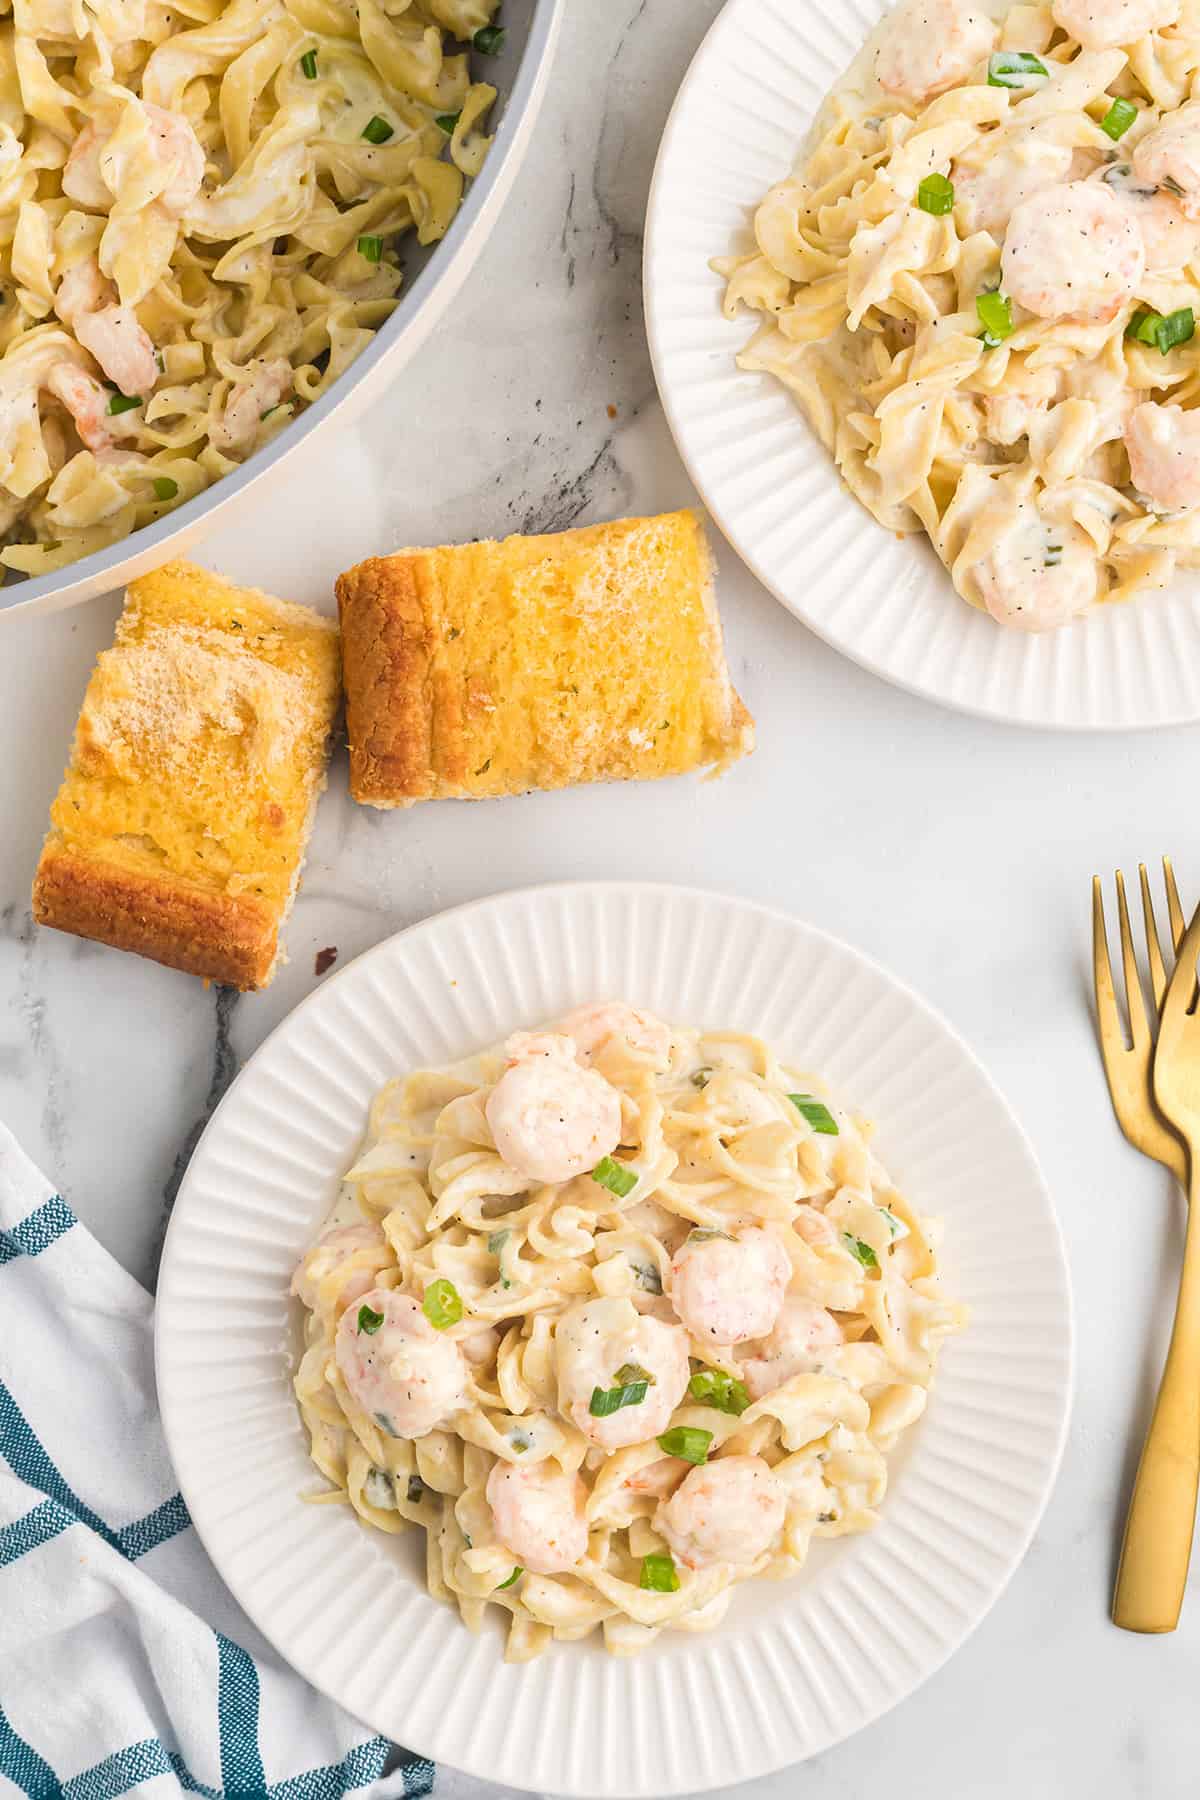 A serving of creamy shrimp pasta on a white plate.